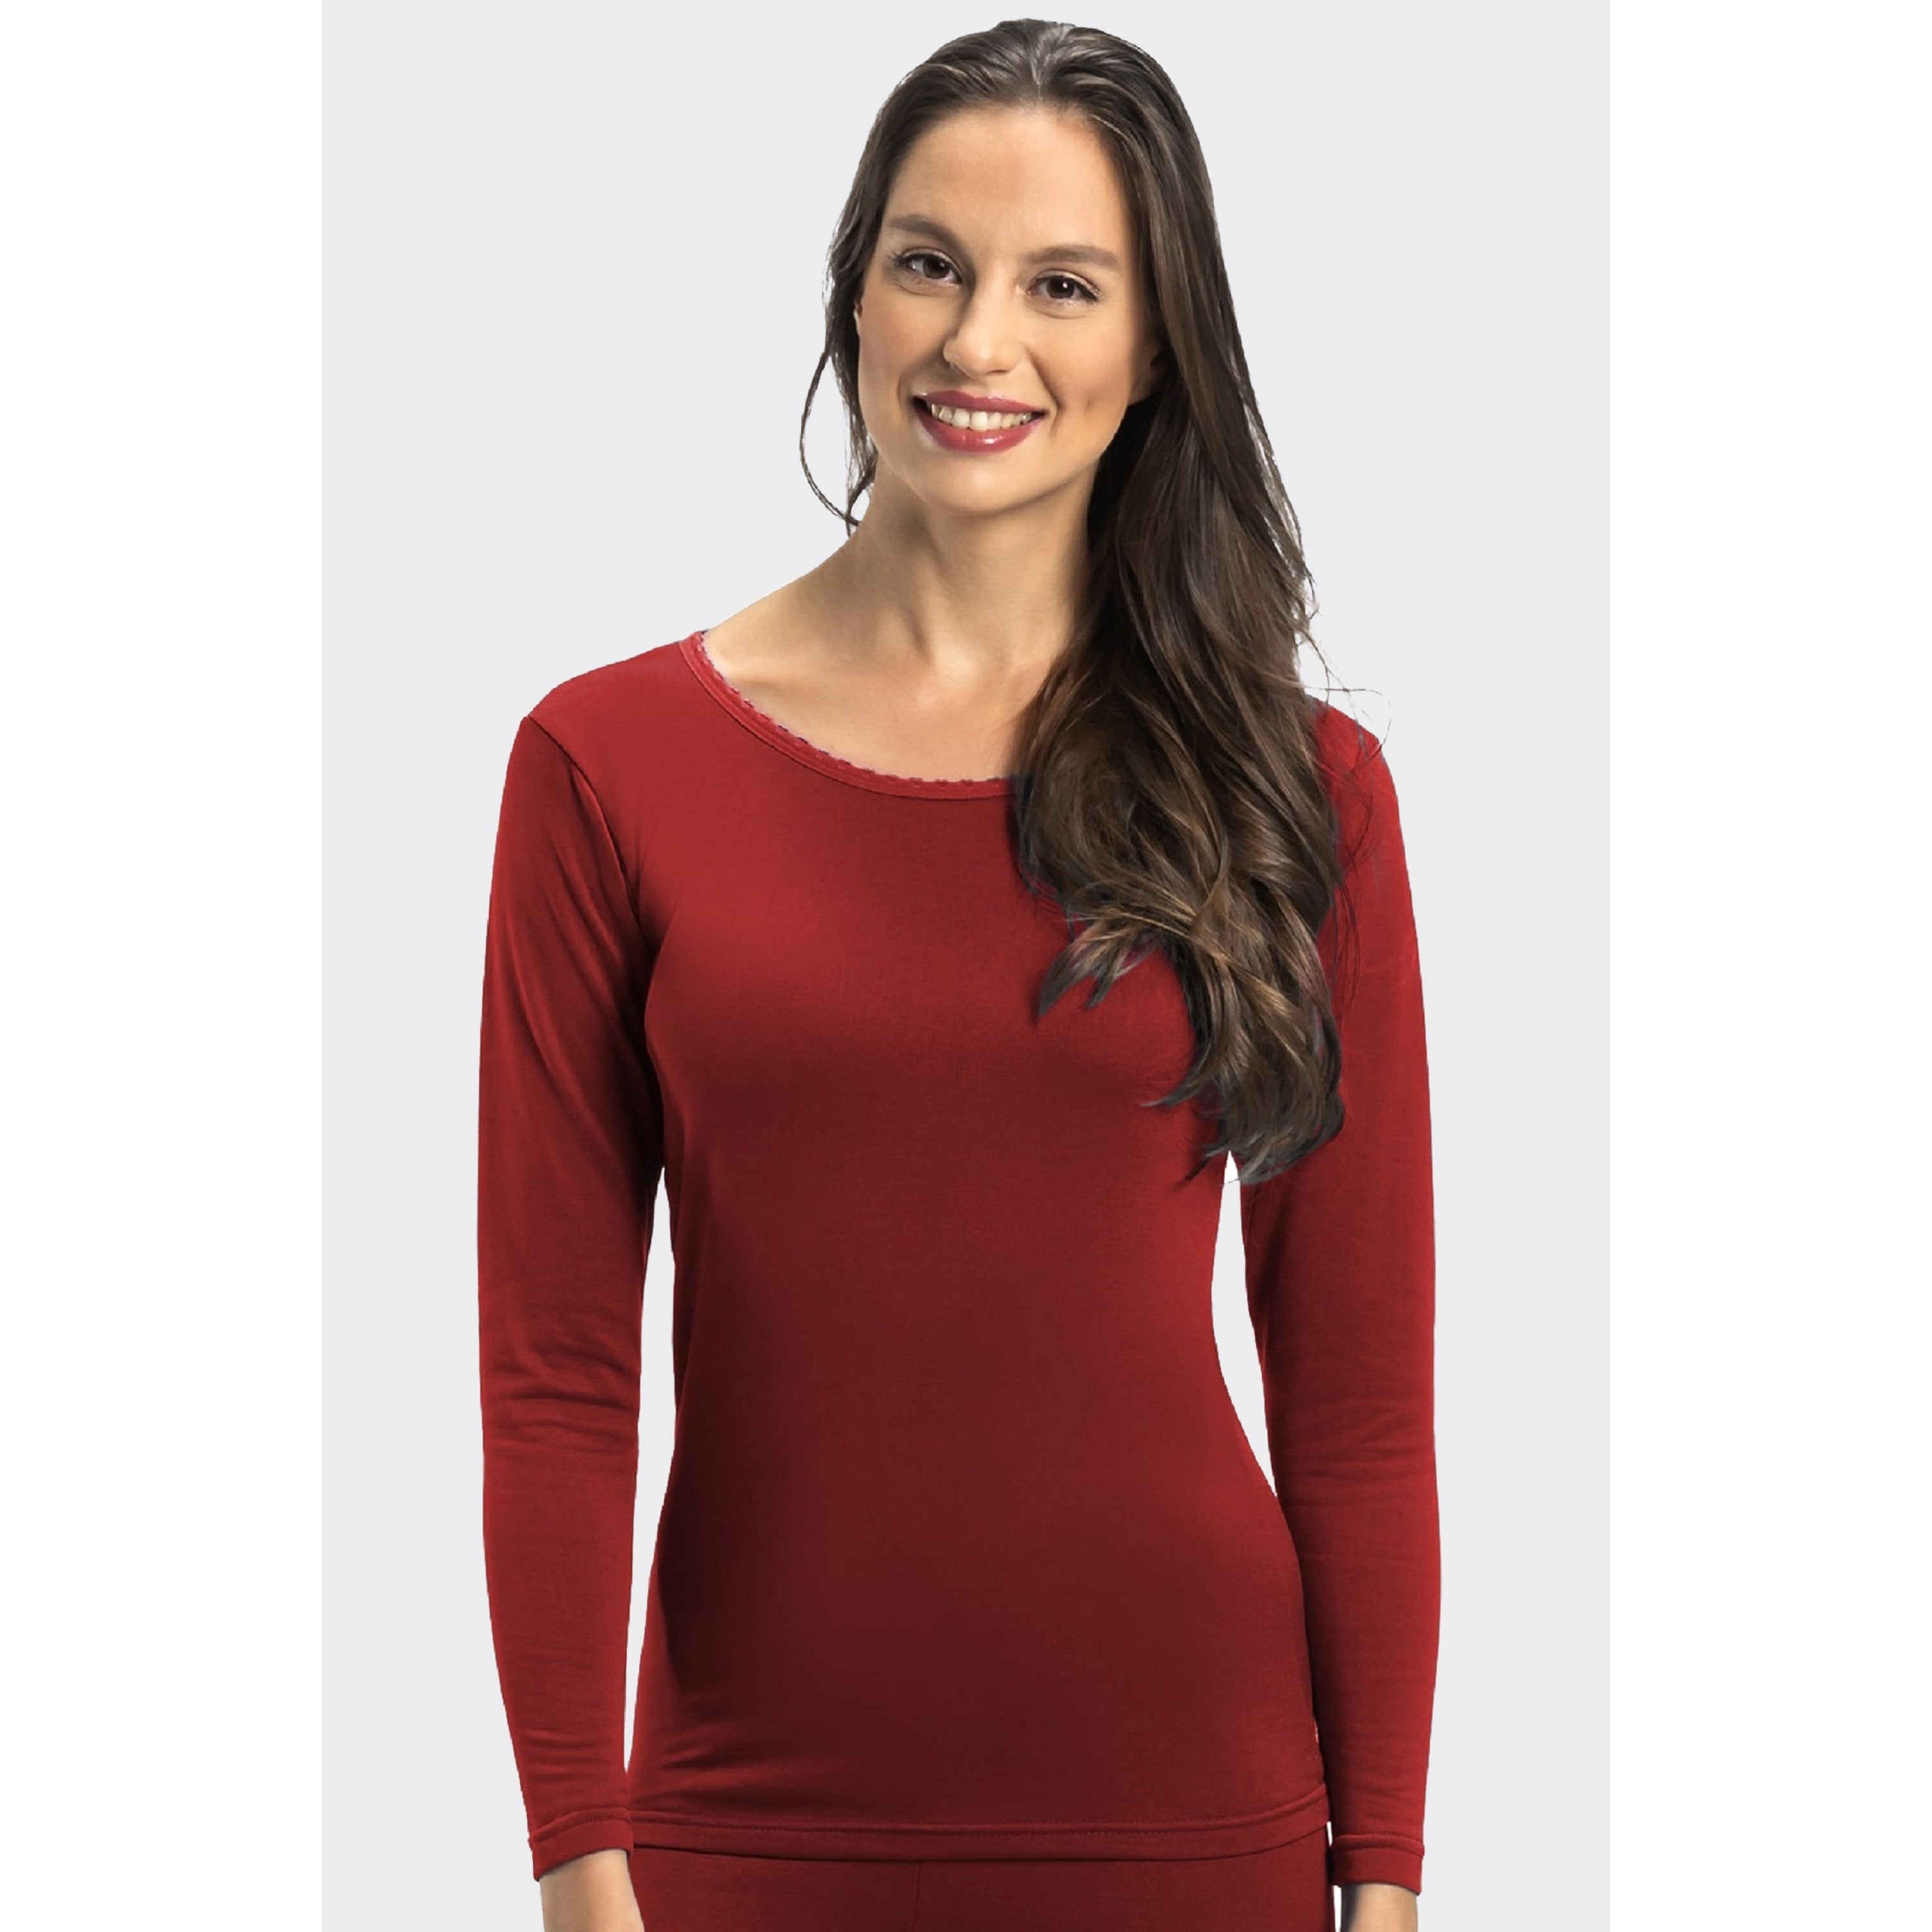 Women's Fleece-Lined Long-Sleeved Thermal Tops (3-Pack) with Plus